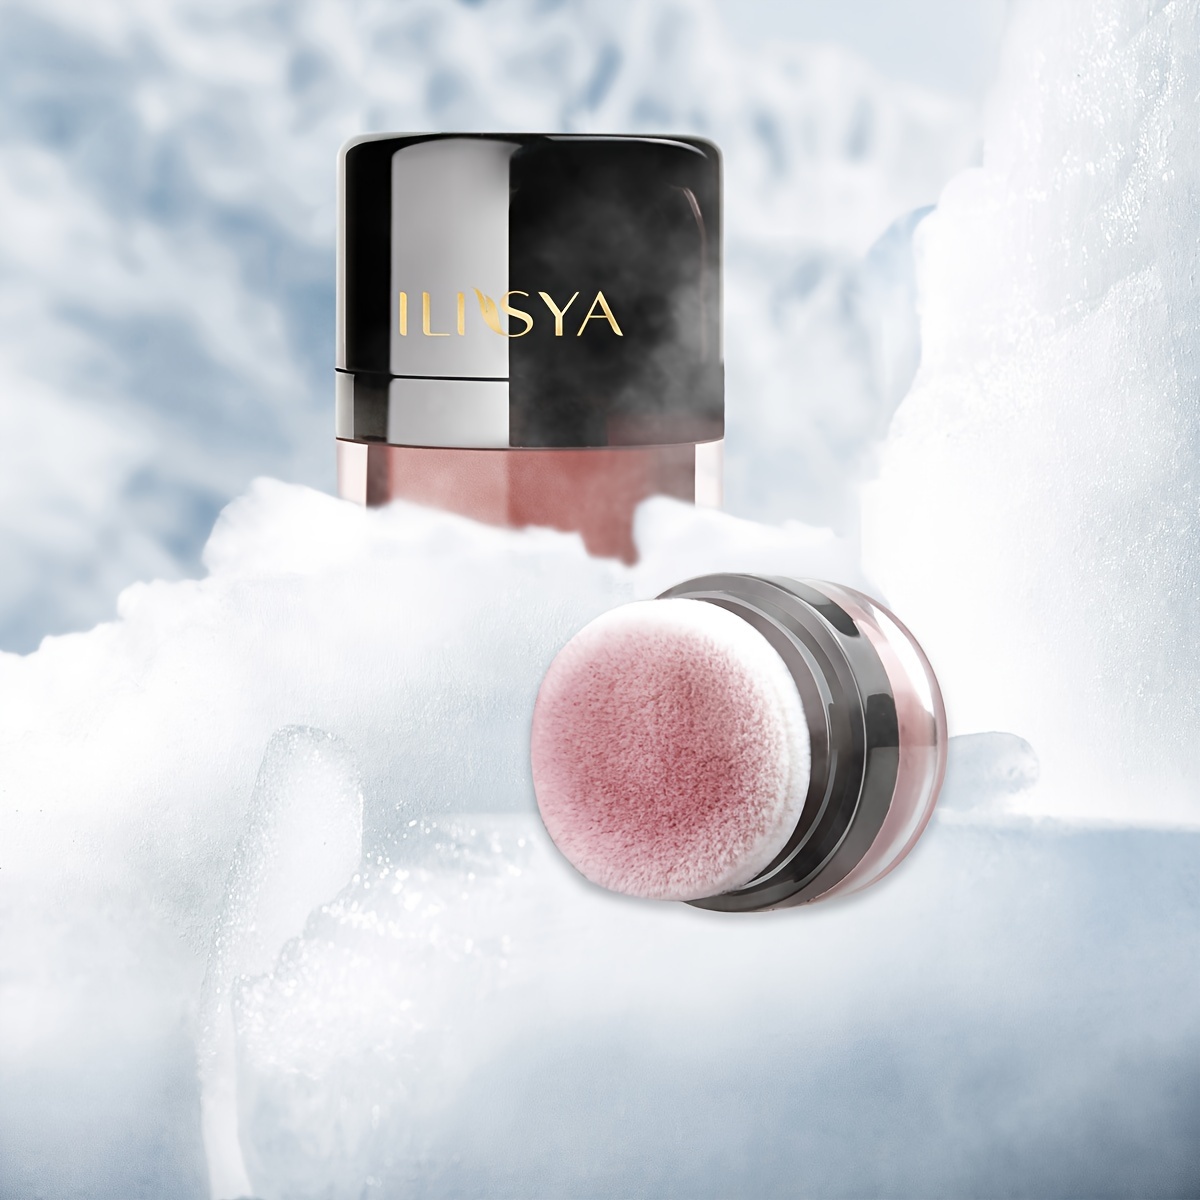 

Ilisya Powder Blusher Creates A Charming Look And With Confidence. Selected High-quality Powder Blusher Makes You Incomparable In Beauty, It Is A Perfect Choice For Daily Use And Holiday Gifts